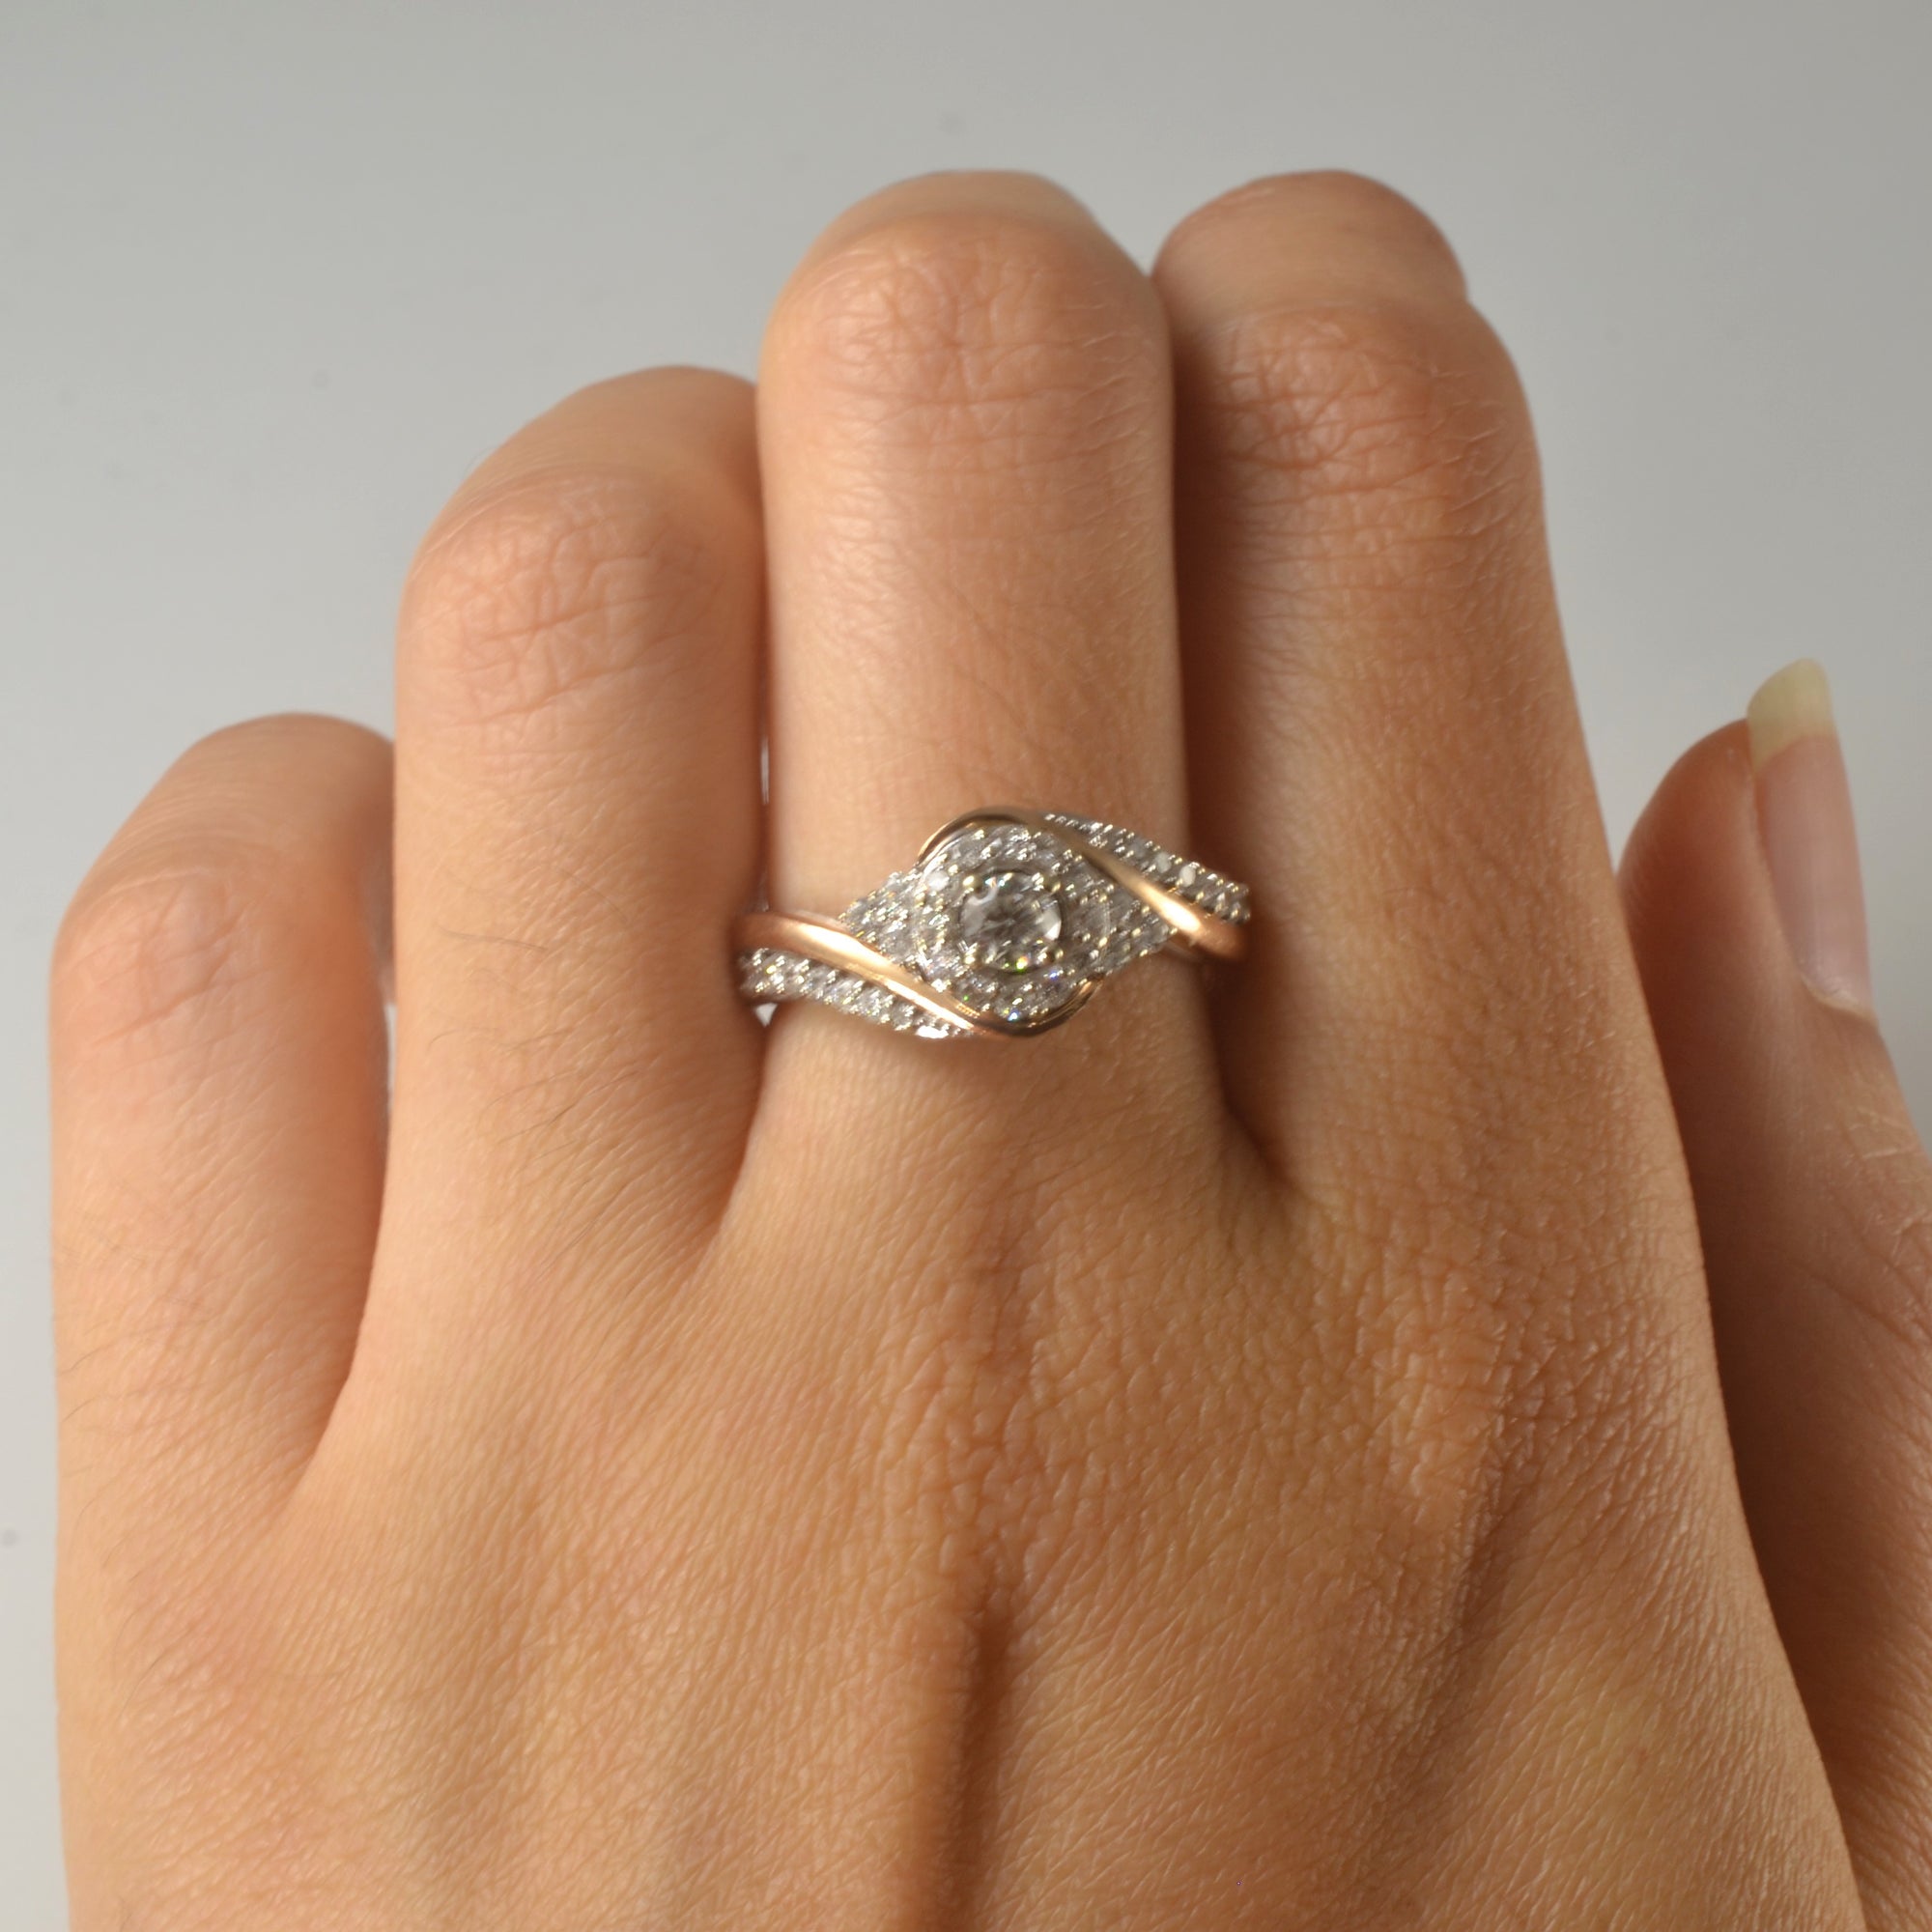 Two Tone Bypass Diamond Cluster Ring | 0.62ctw | SZ 7.5 |